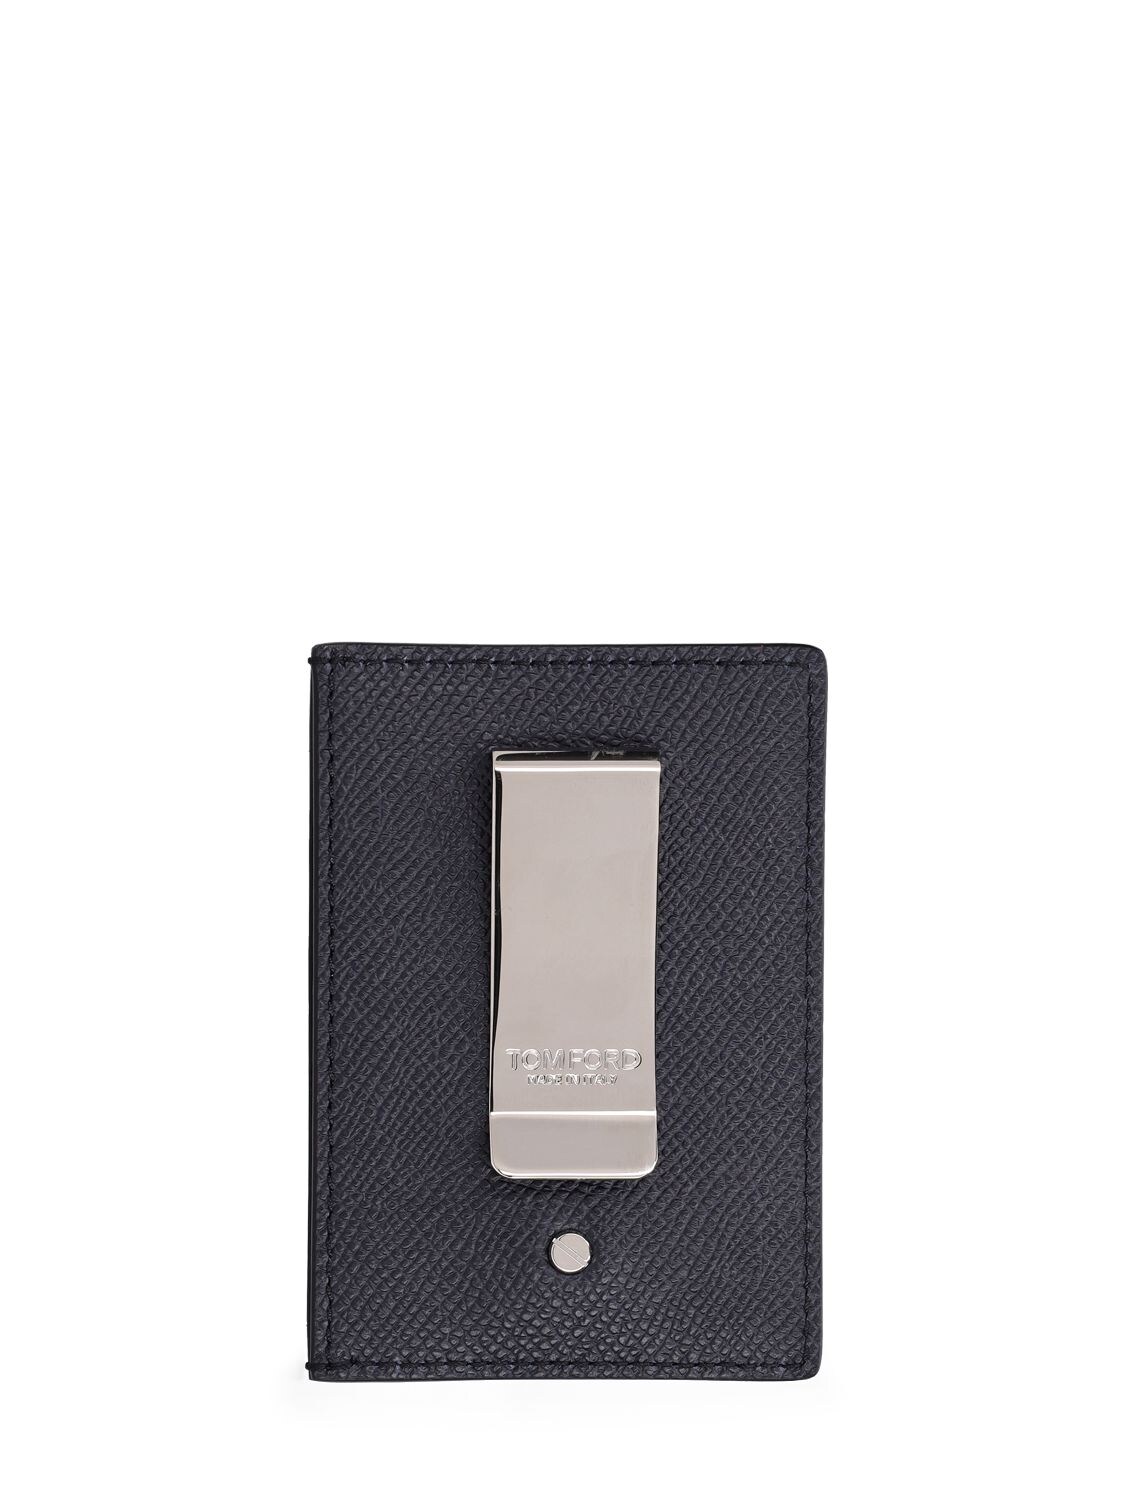 Tom Ford Small Leather Money Clip Cardholder In Midnight Blue | ModeSens